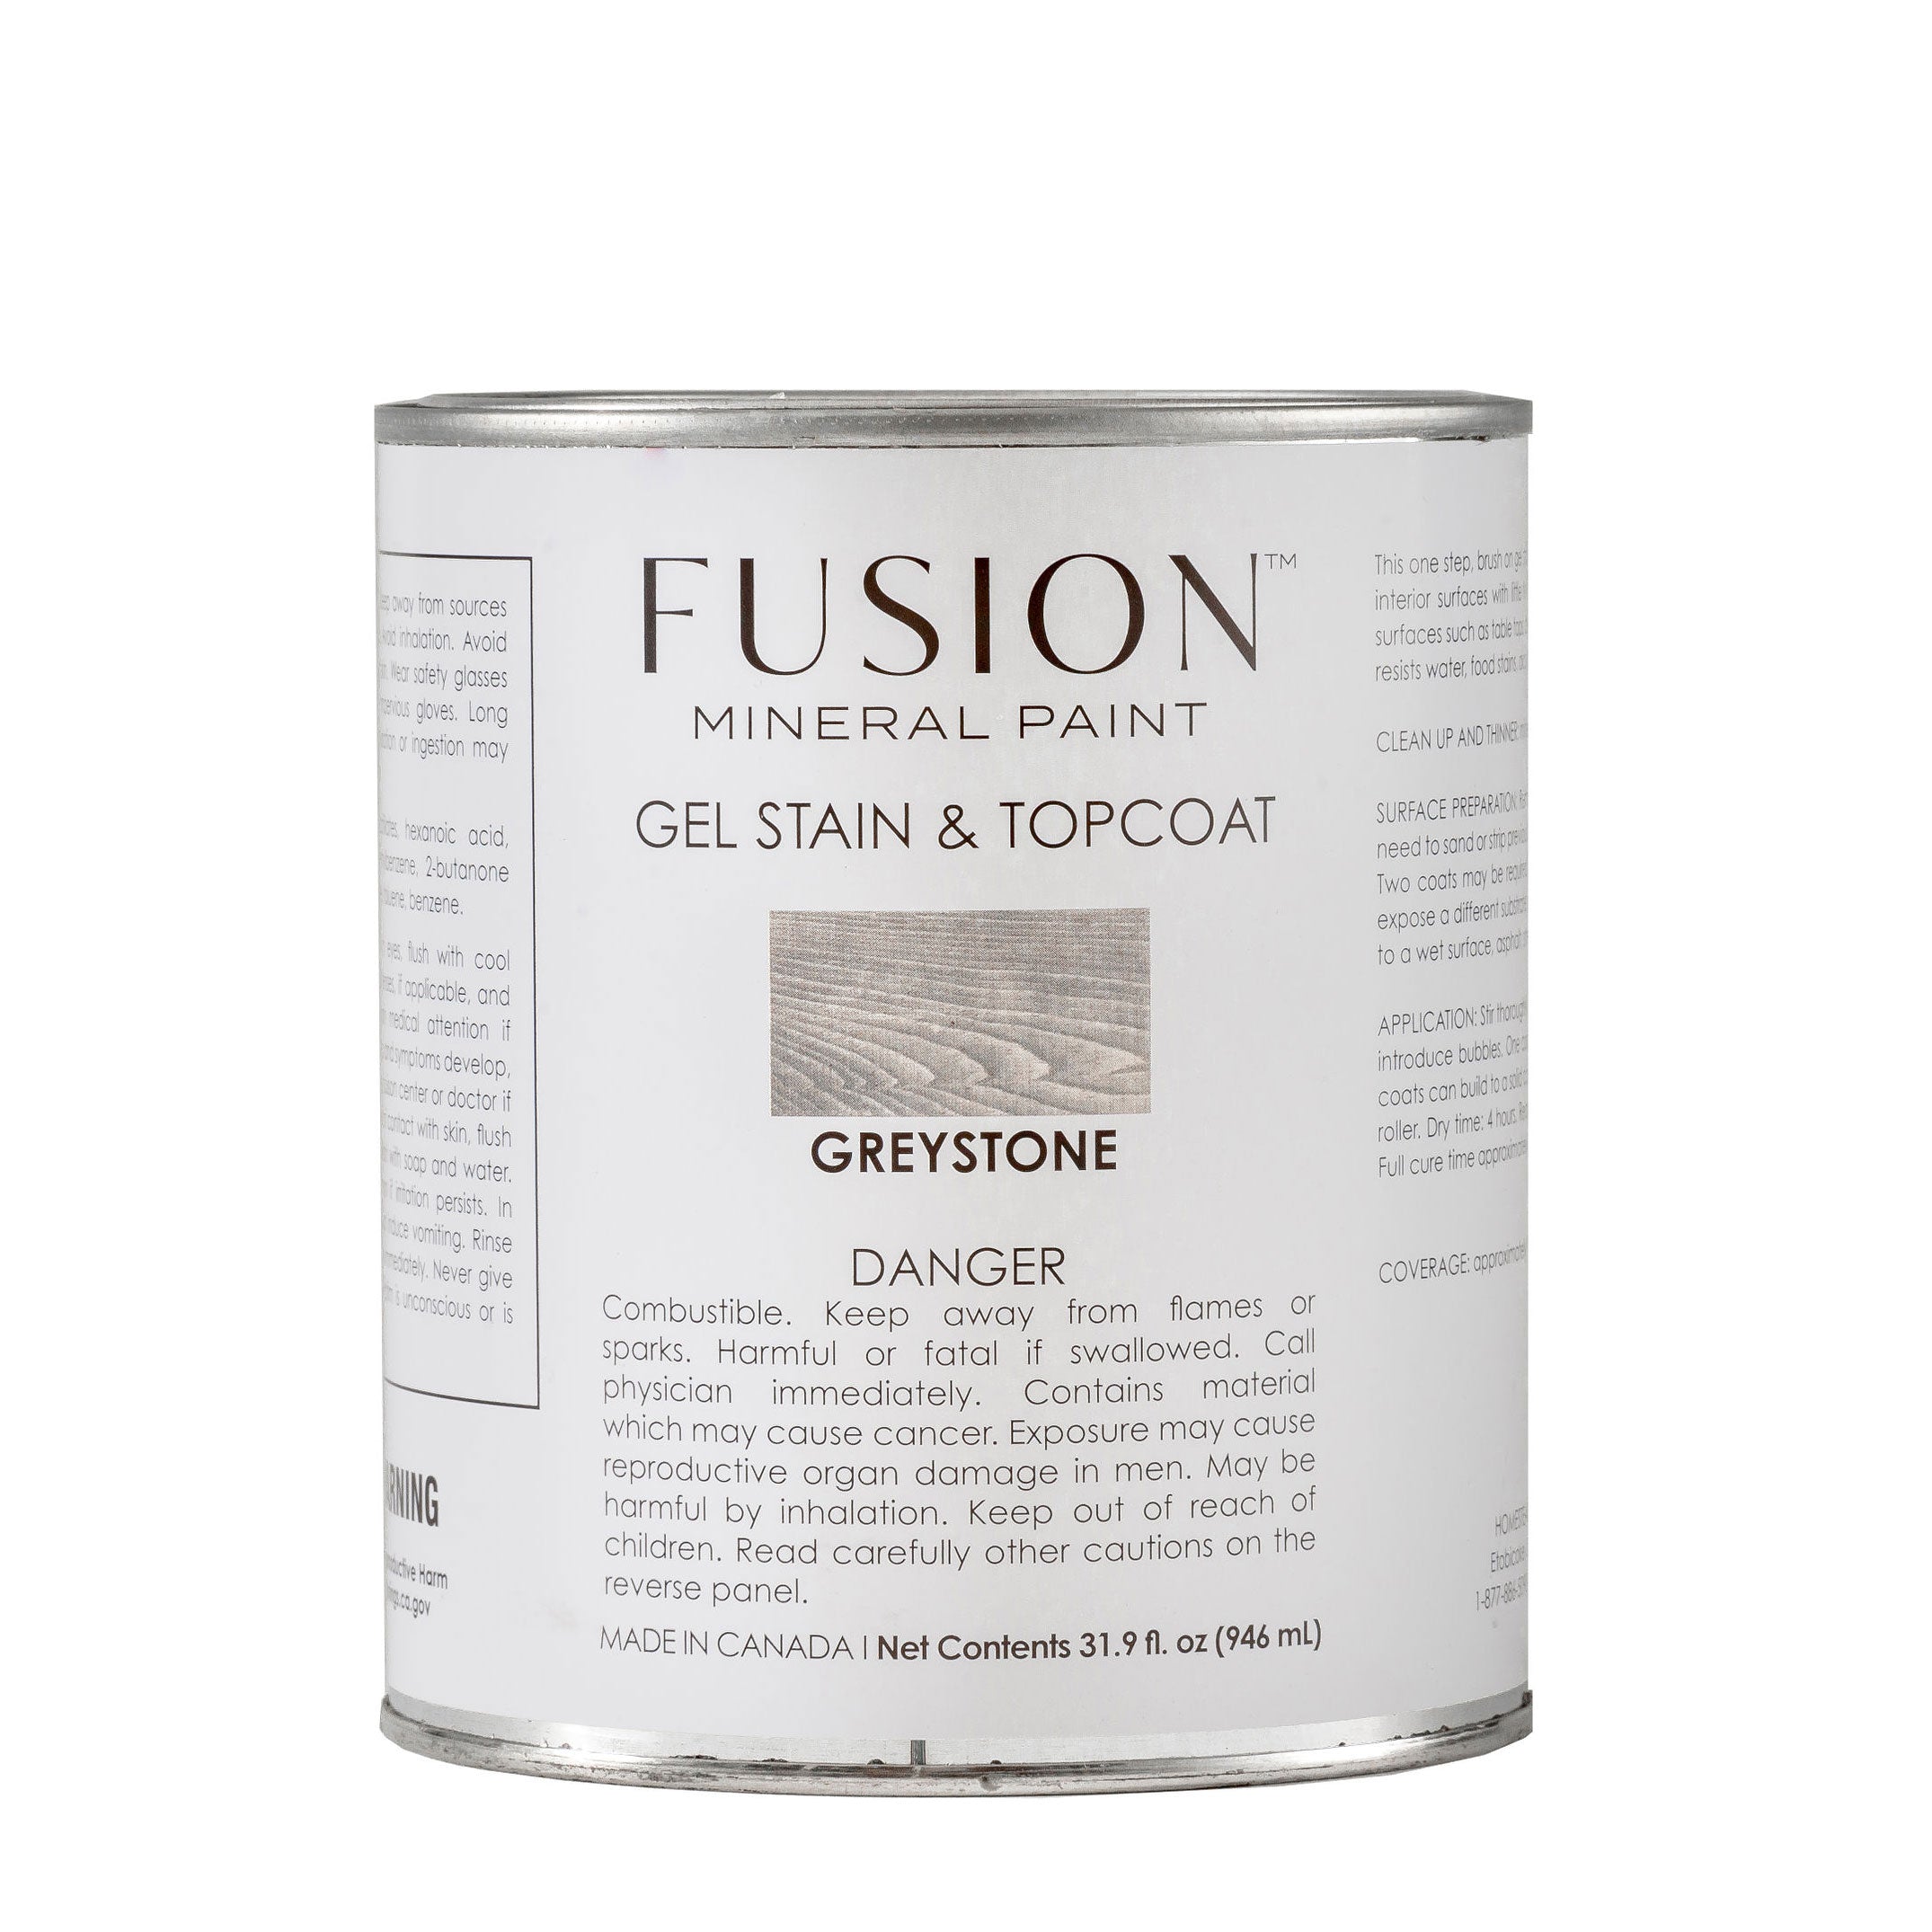 Fusion Mineral Paint - Brush On Gel Stain & Top Coat